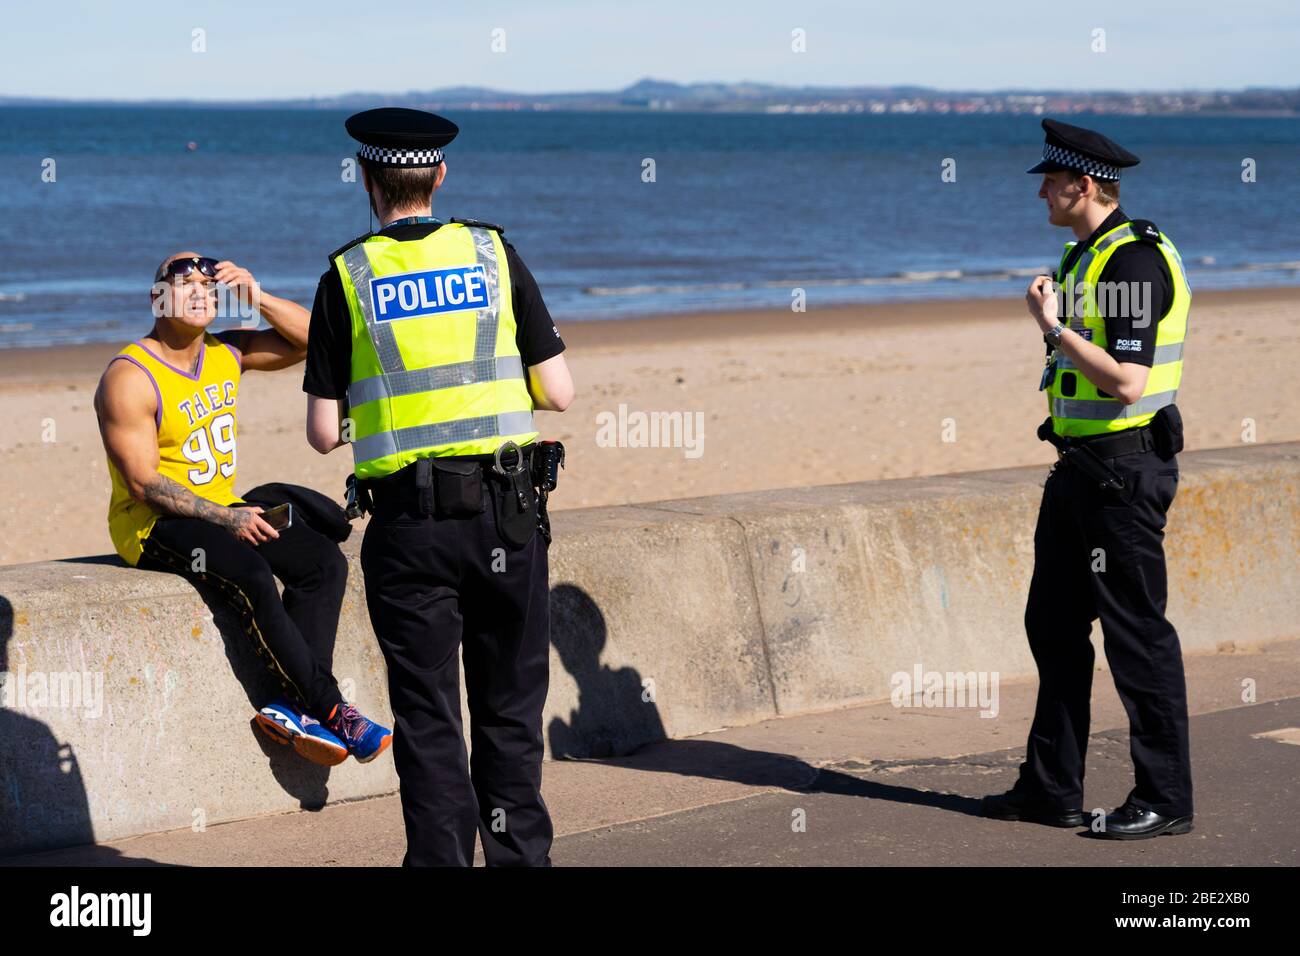 Portobello, Edinburgh. Scotland, UK. 11 April, 2020. Easter bank holiday weekend Saturday afternoon in very warm sunny weather the public are outdoors exercising and walking on Portobello beach. The popular beach and promenade was very quiet and people were mostly exercising proper social distancing. Pictured; Police patrolling the promenade stop to talk to a man sitting on seawall. He was asked to move on.  Iain Masterton/Alamy Live News Stock Photo